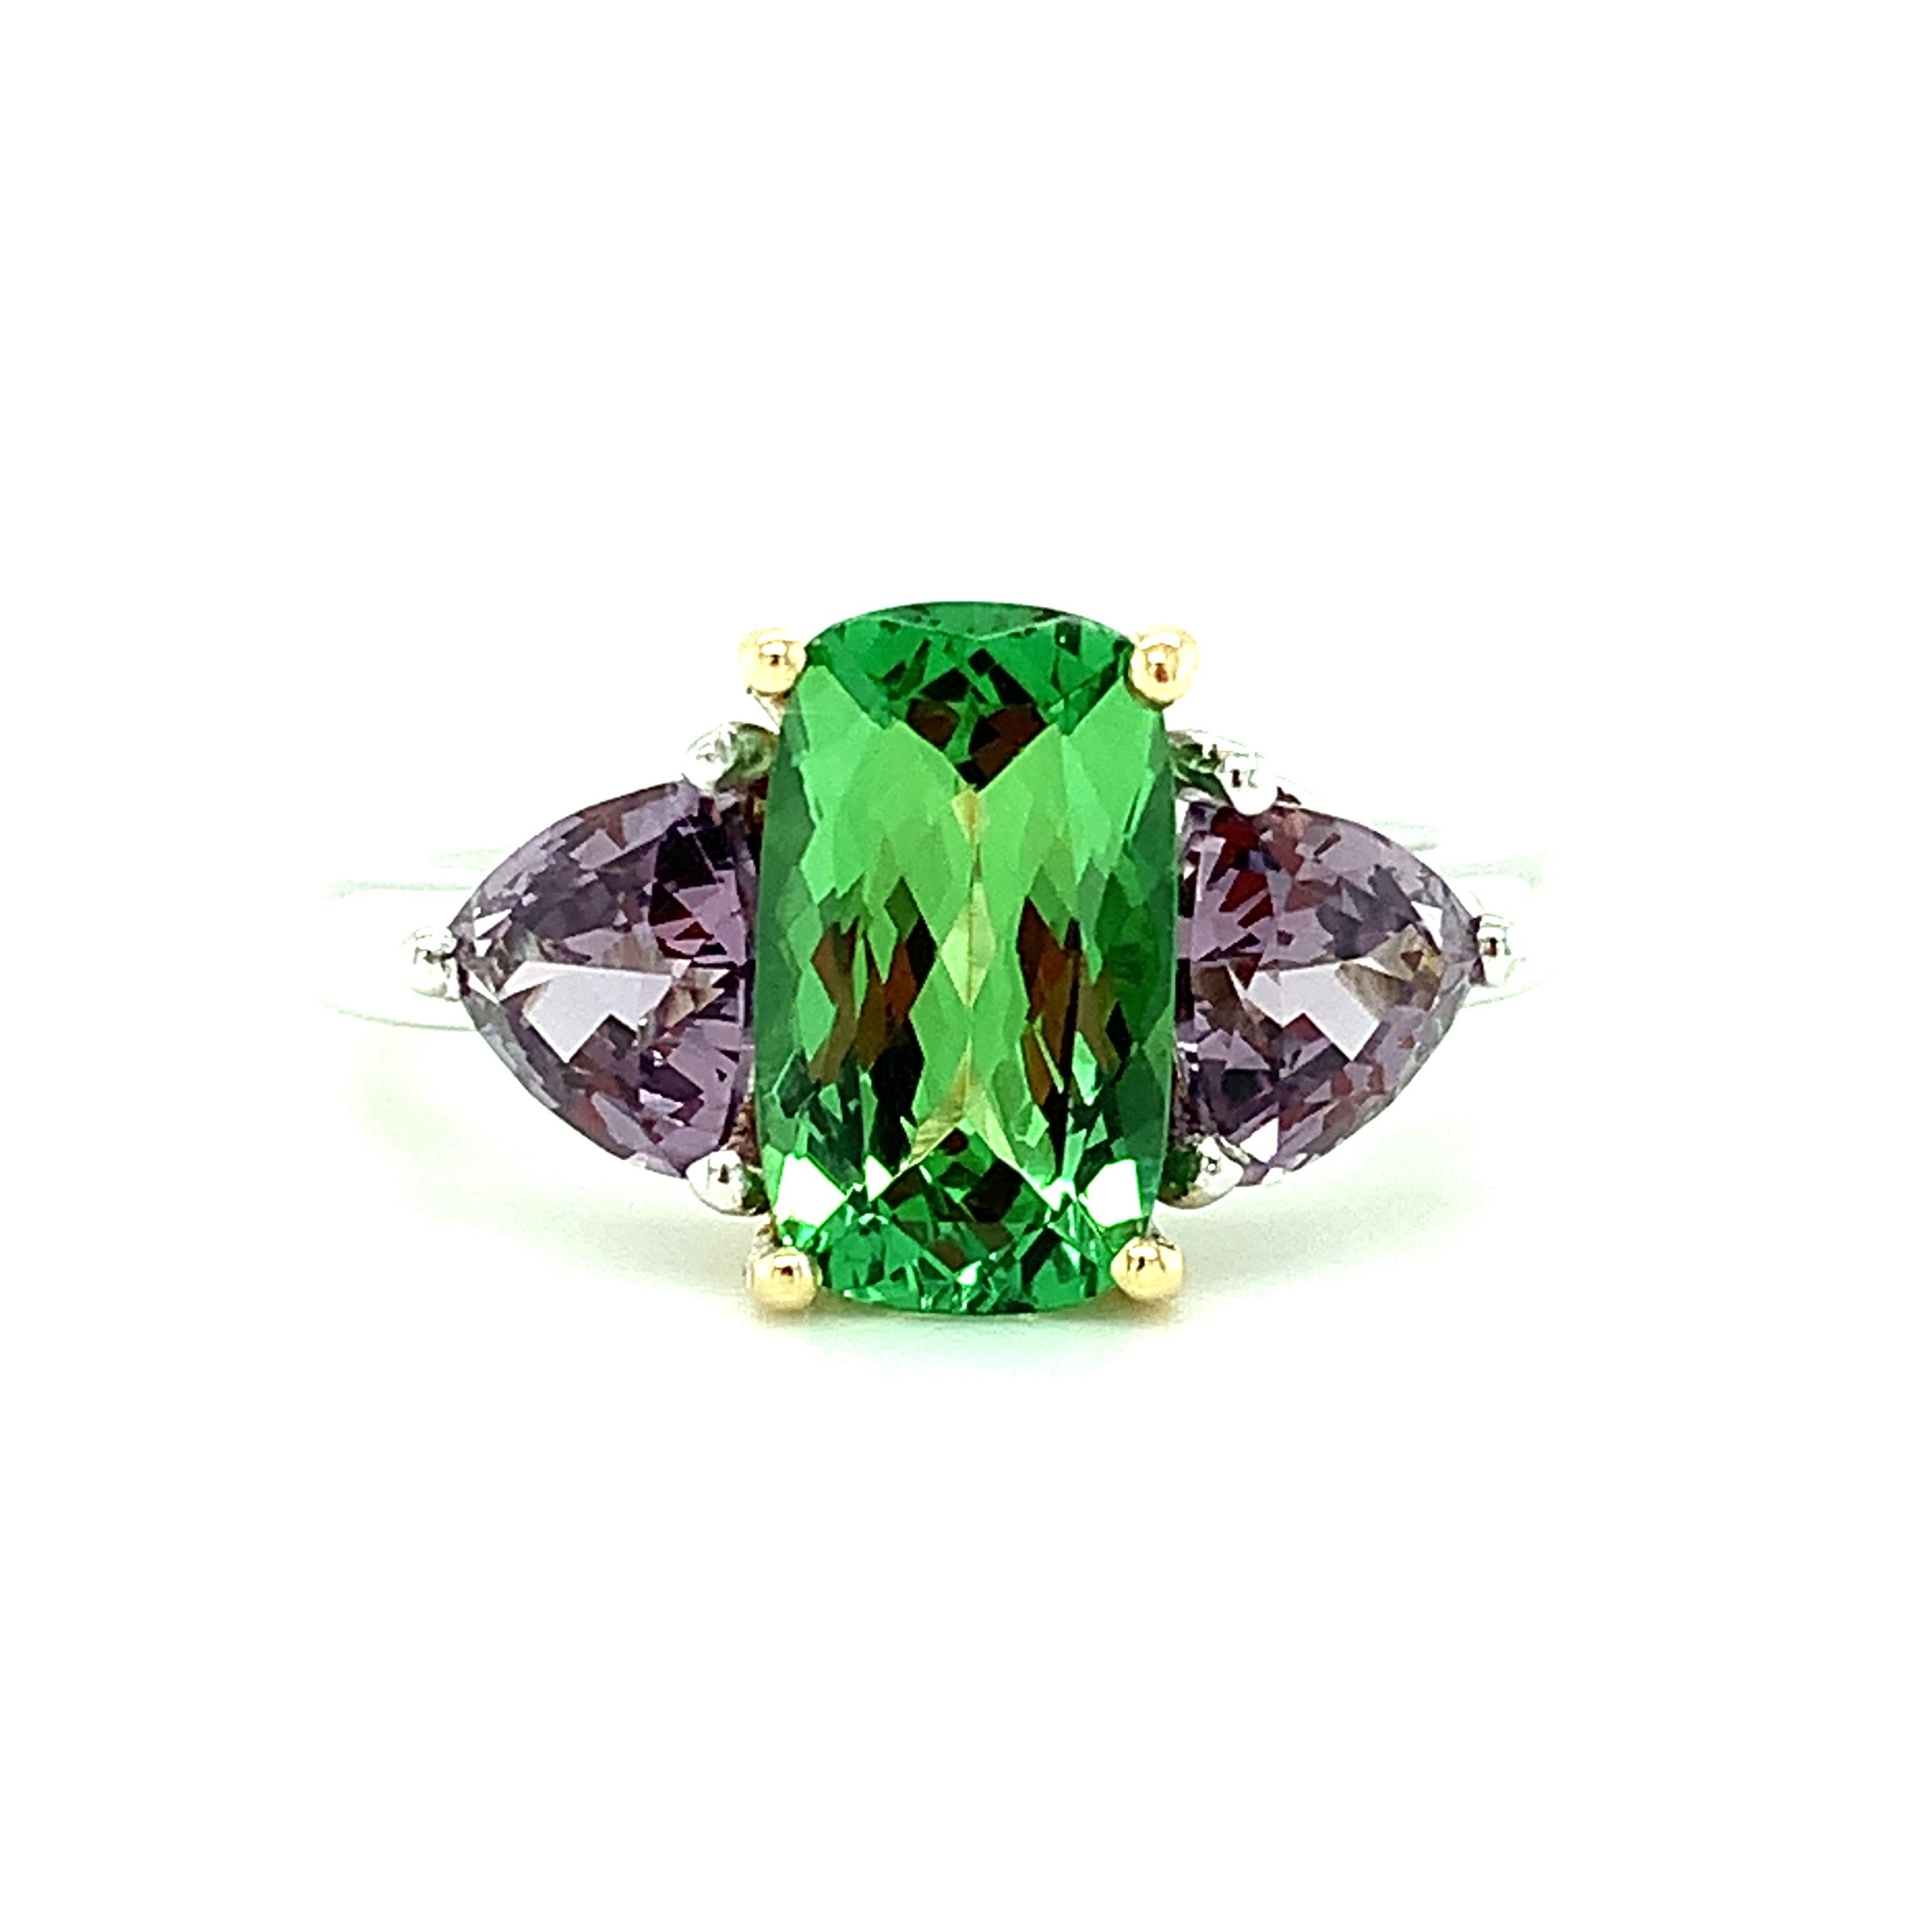 If you love rare and beautiful gemstones, this stunning ring is perfect! We have paired a bright green, 2.12 carat Tsavorite garnet with trilliant-cut purple spinels in one of nature's favorite color combinations! The tsavorite is a brilliant